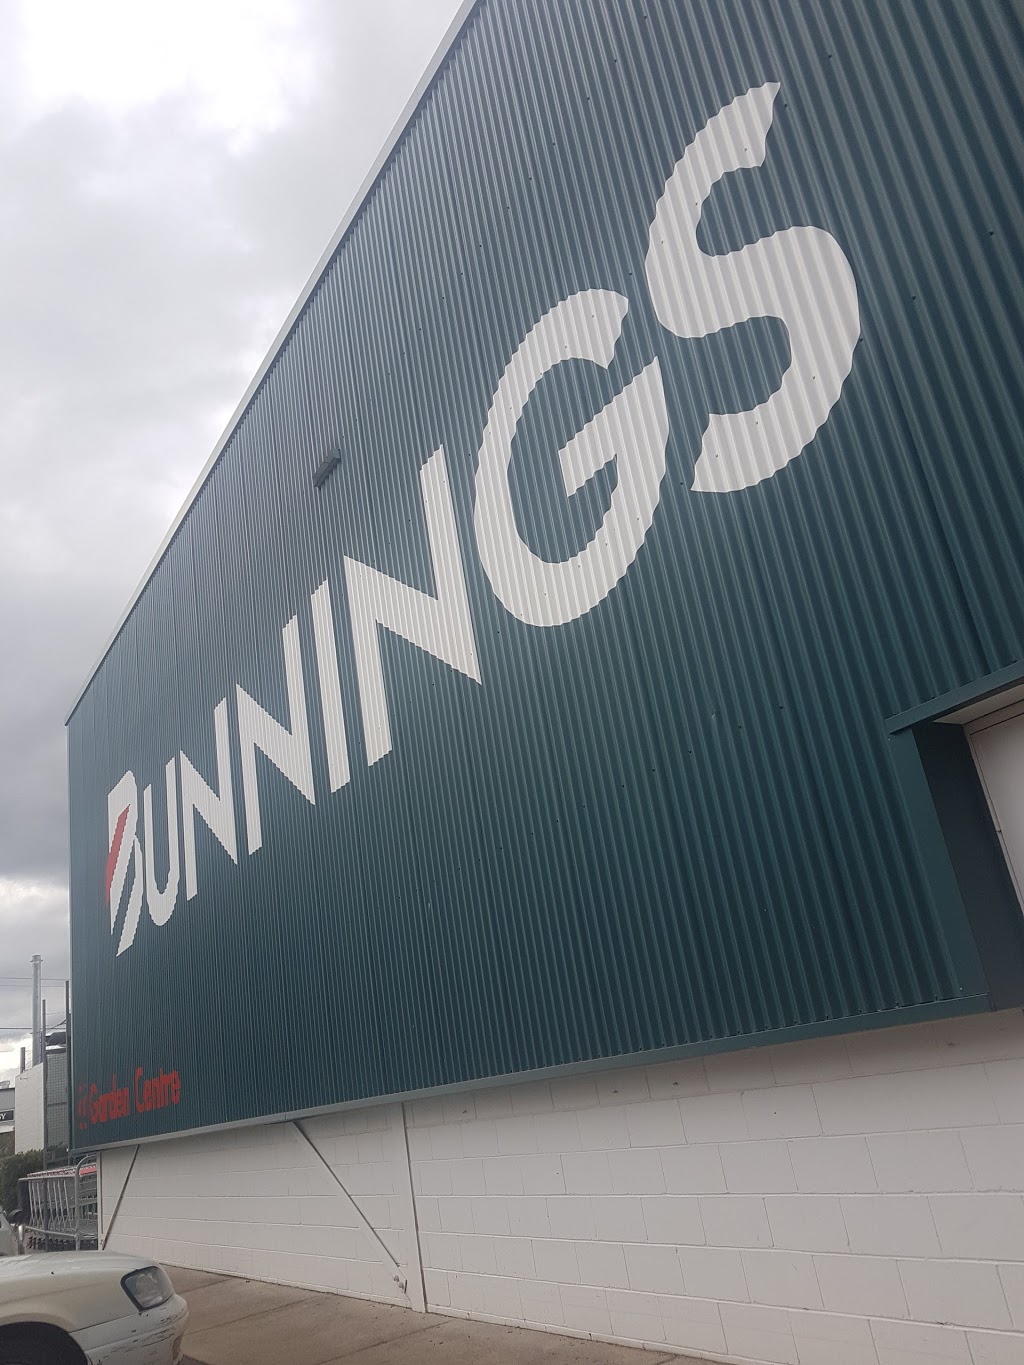 Bunnings Mudgee | hardware store | Castlereagh Hwy, Mudgee NSW 2850, Australia | 0263786700 OR +61 2 6378 6700